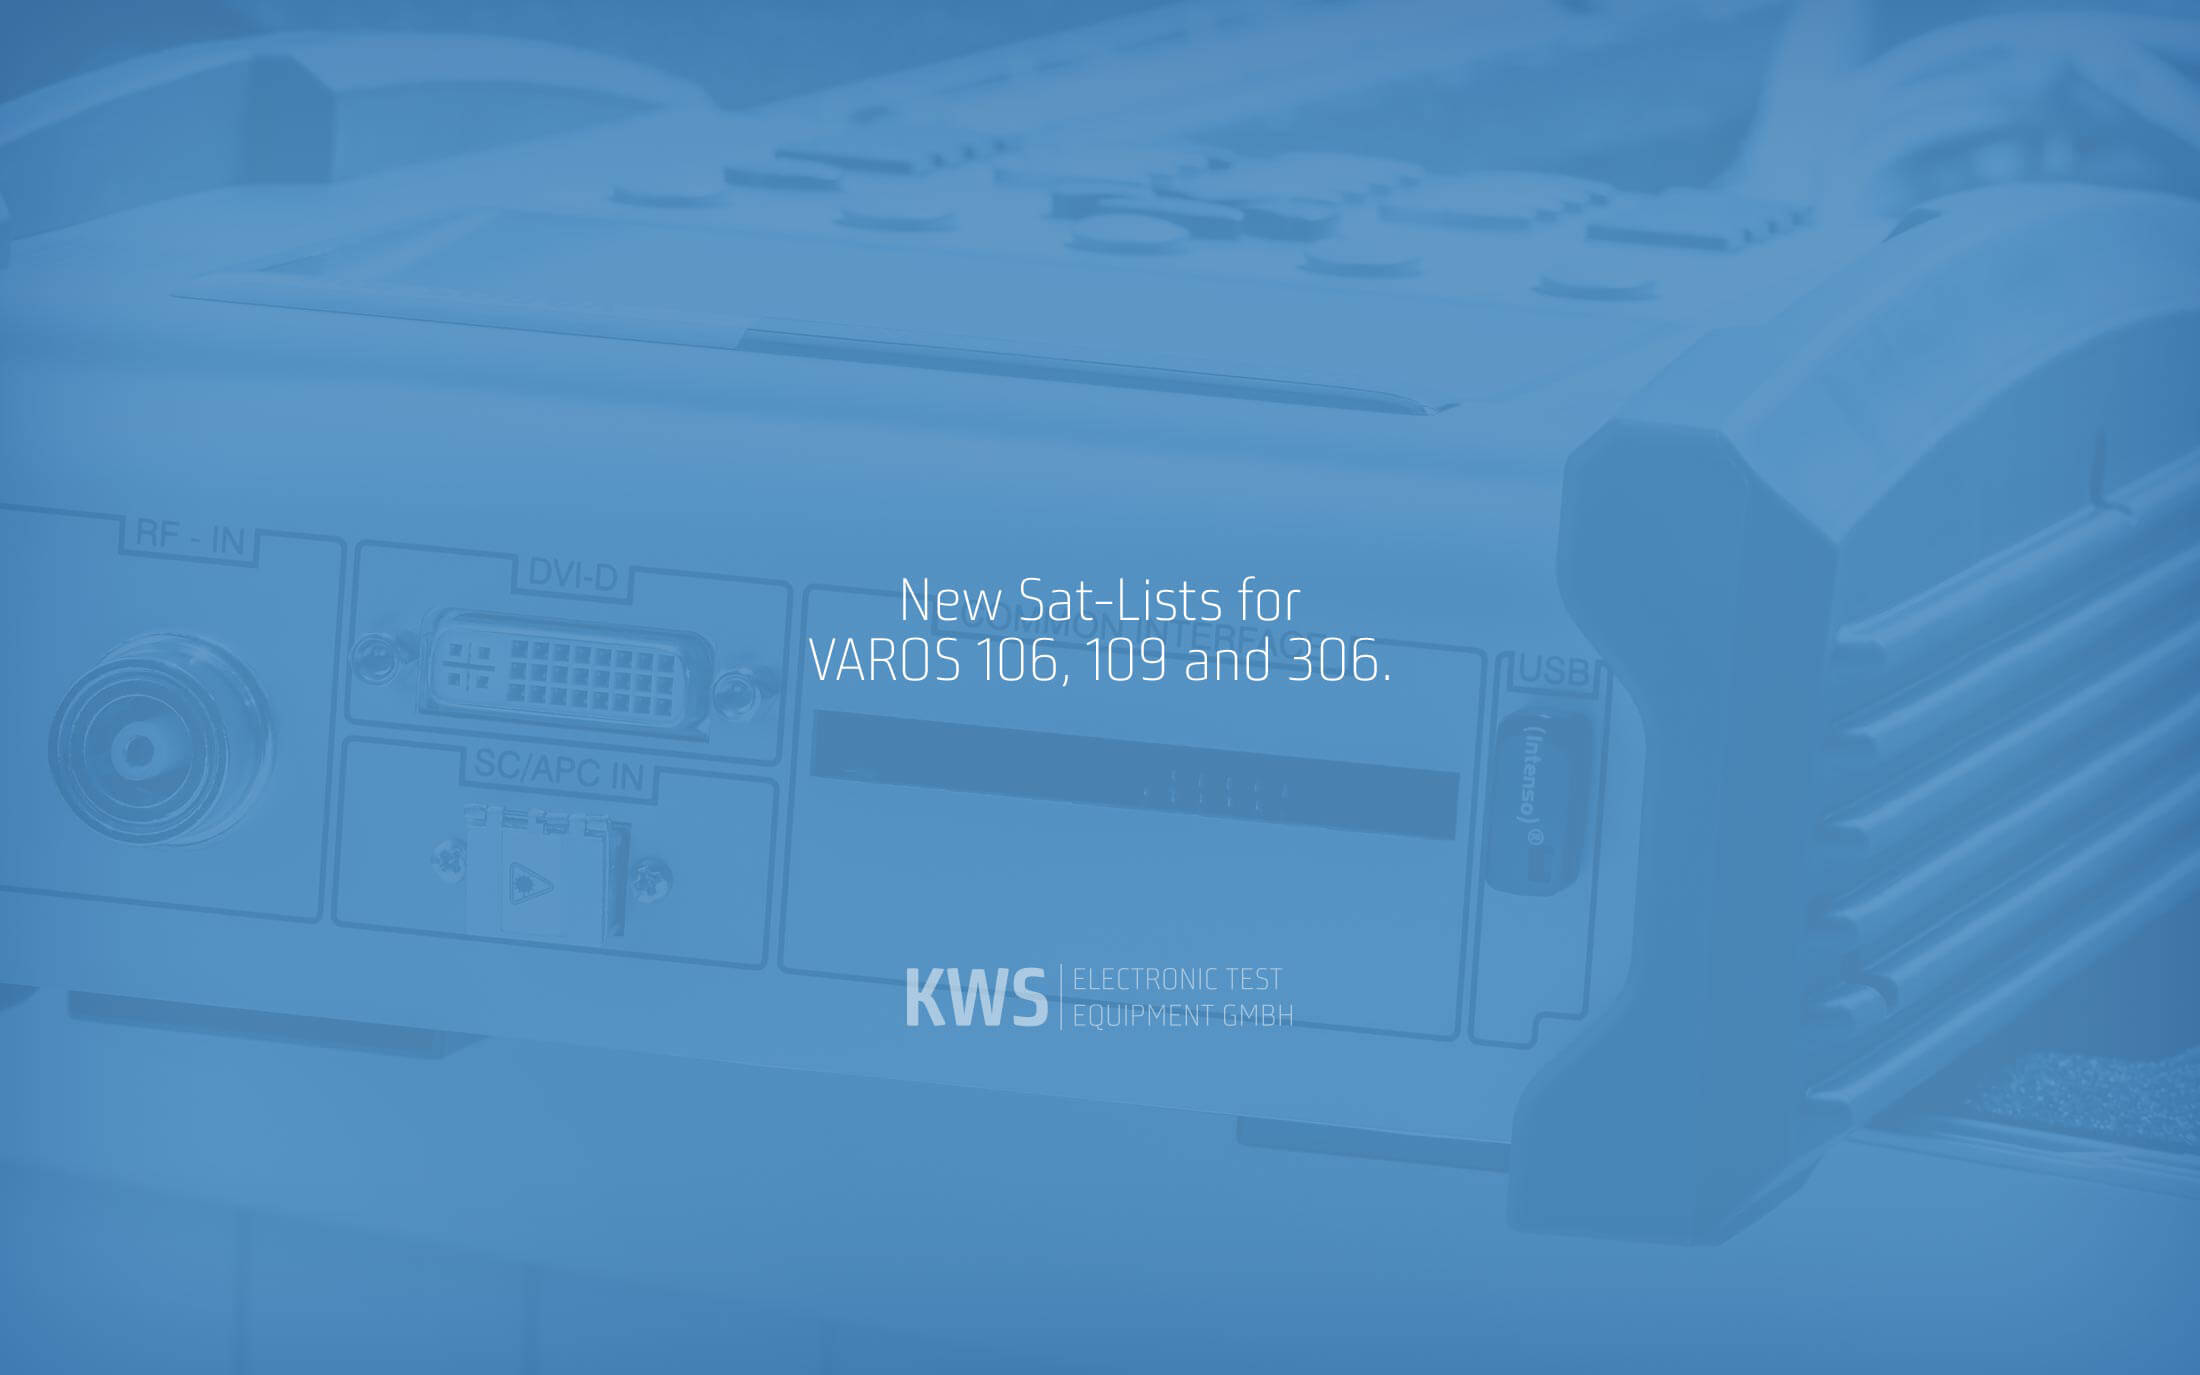 KWS-Electronic News 2019: New Sat lists for VAROS 106, 109 and 306